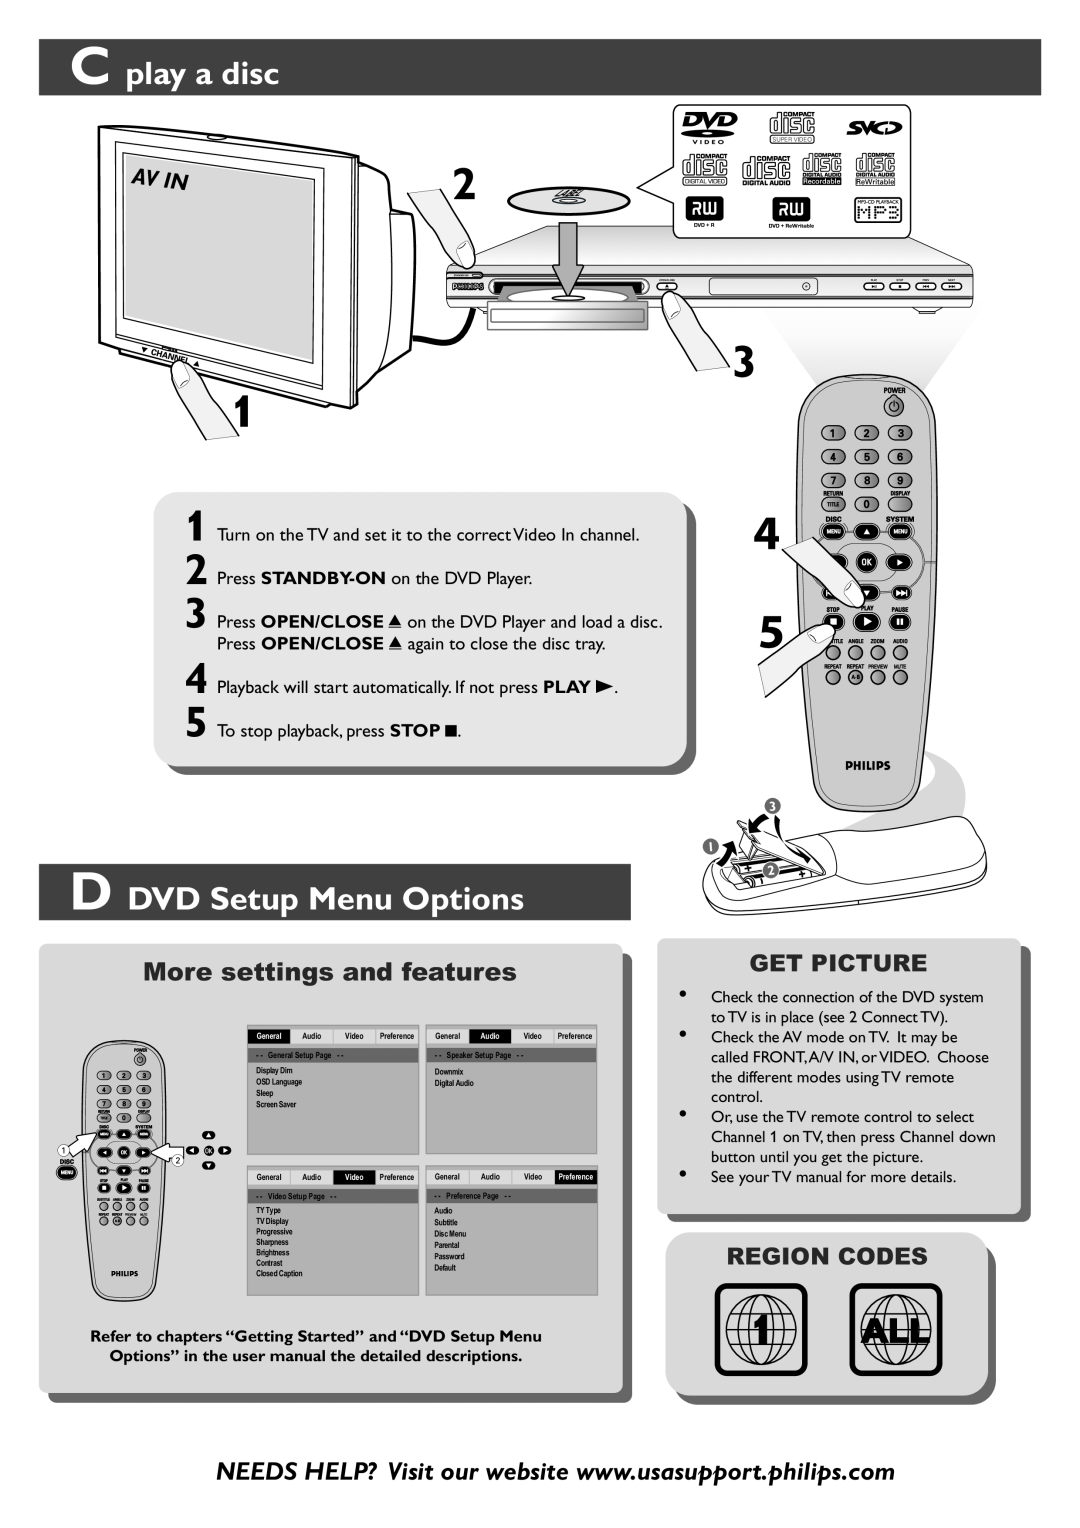 Philips DVP3500/37B C play a disc, D DVD Setup Menu Options, Turn on the TV and set it to the correct Video In channel 